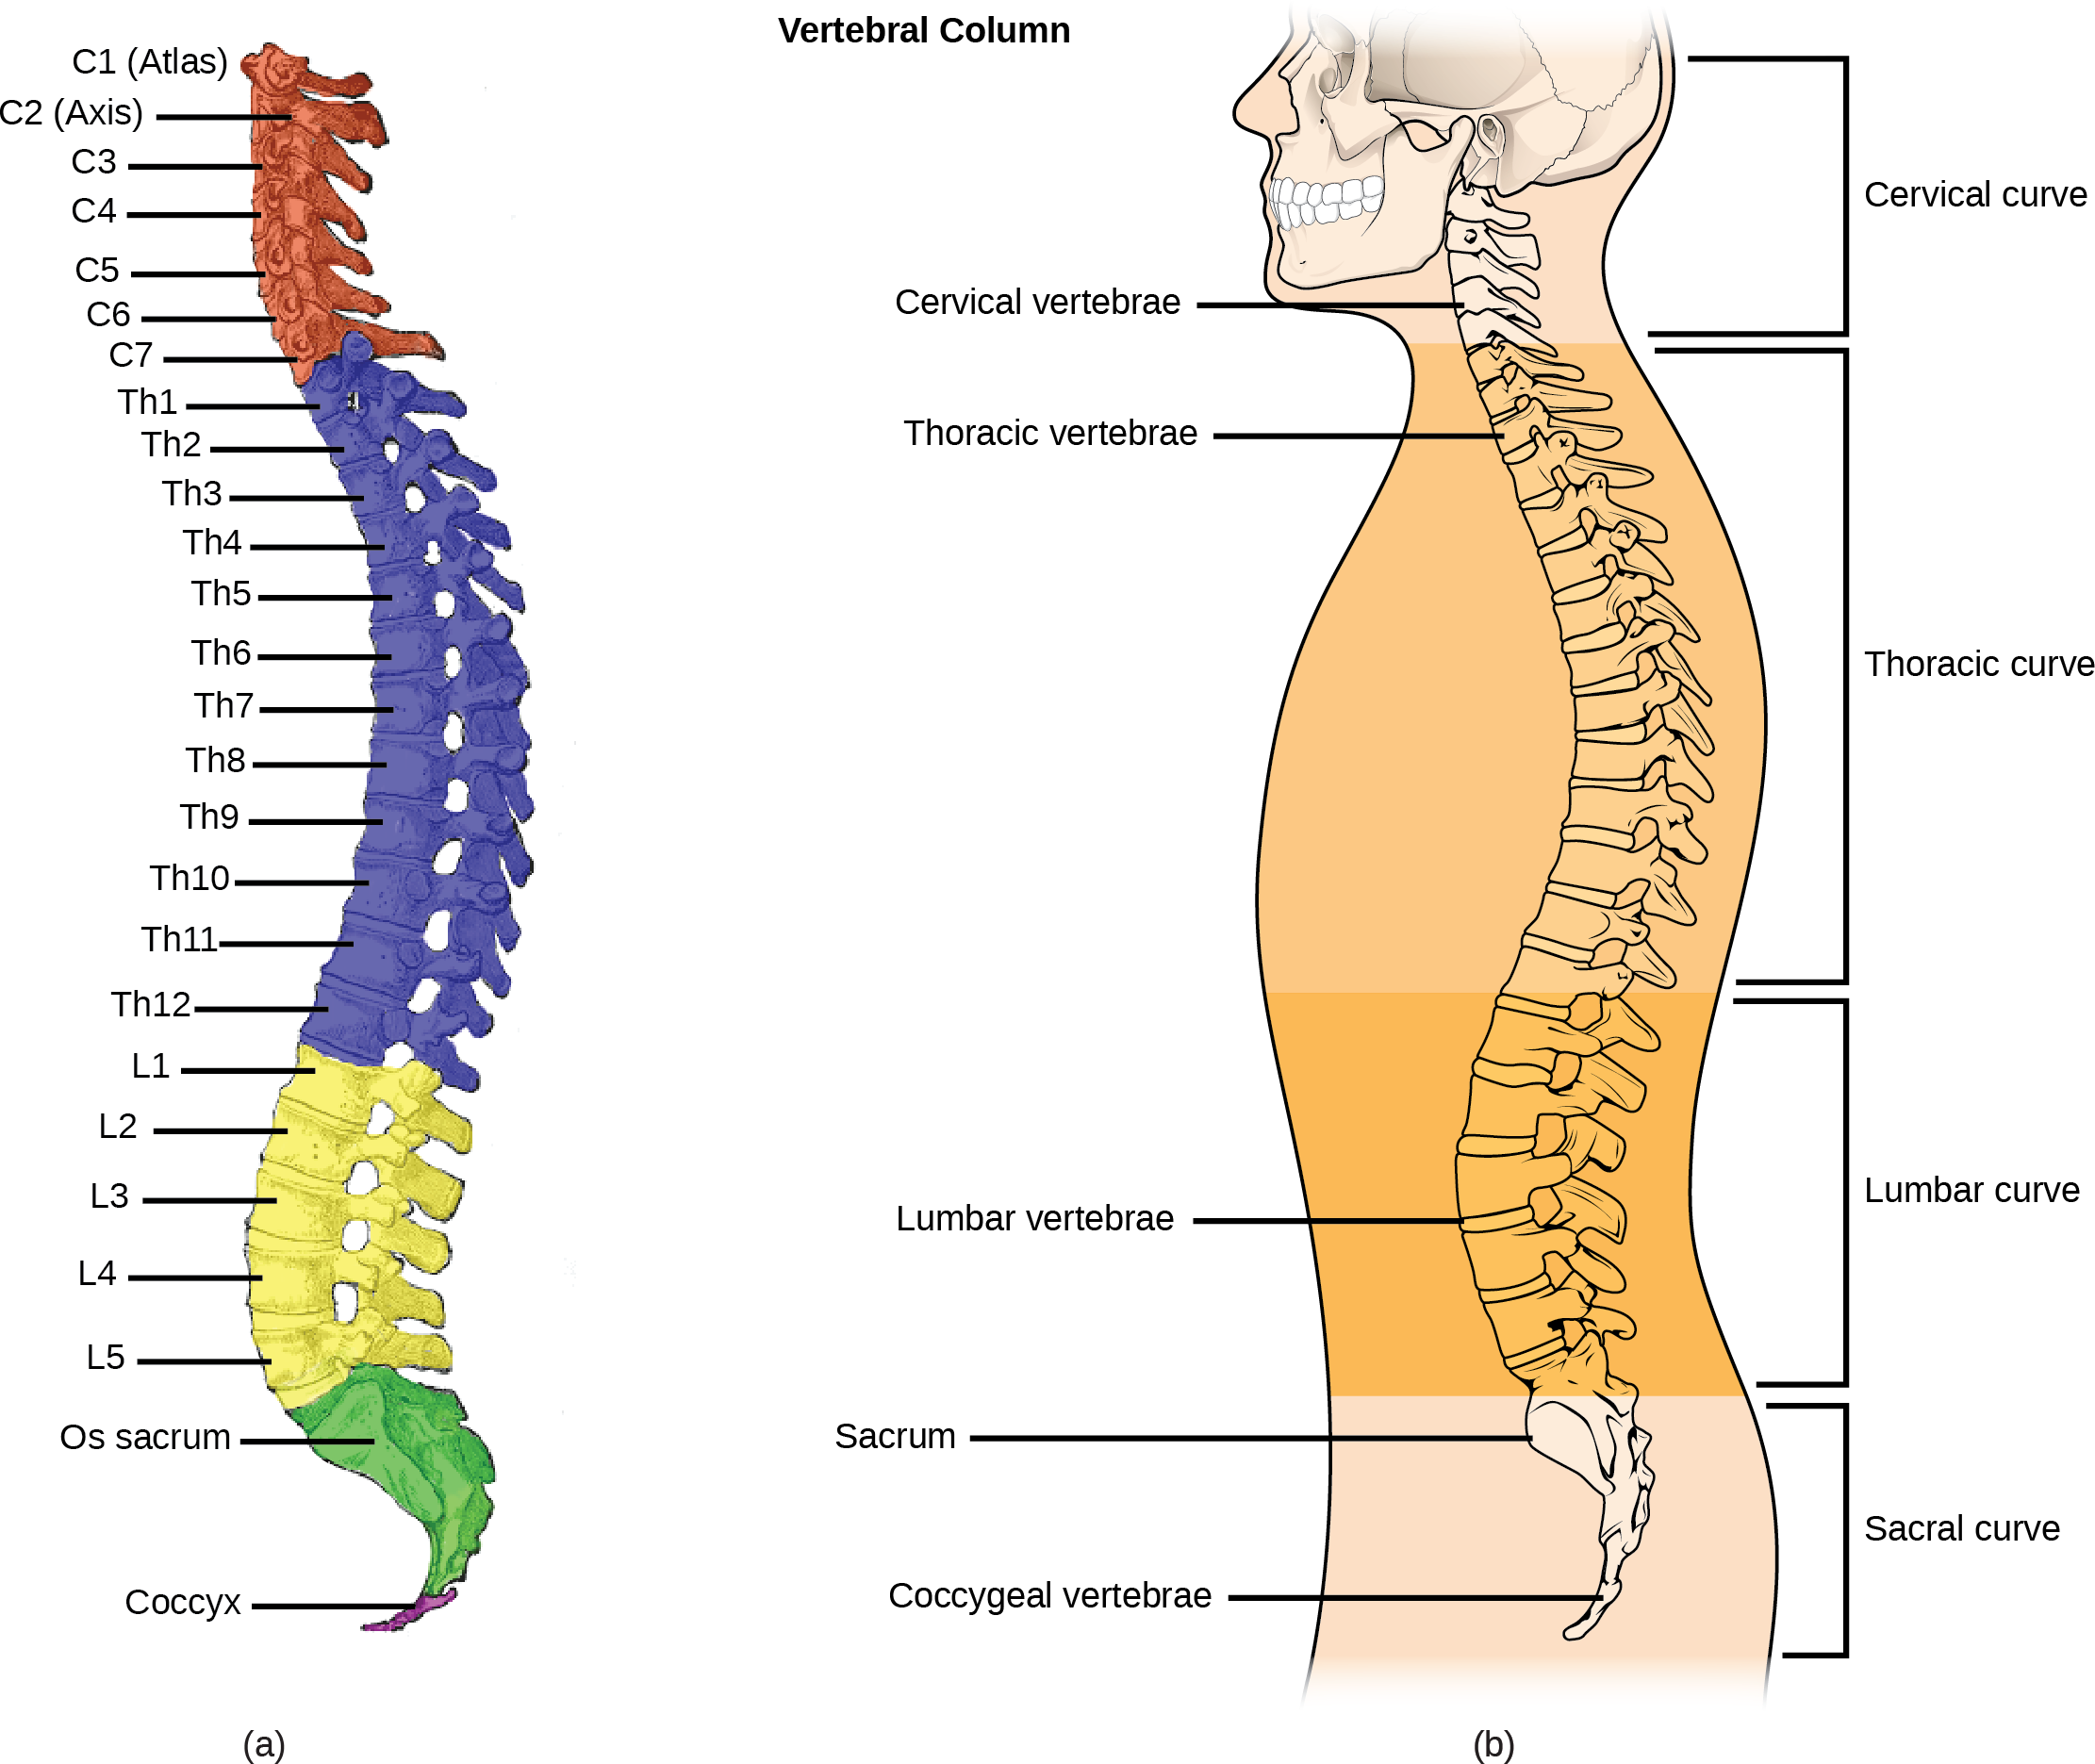 Illustration A shows all the vertebrae in a vertebral column. Illustration B shows that different sections of vertebrae curve in different directions. The cervical vertebrae in the neck curve toward the front of the body. The top cervical vertebrae is called the atlas, or c 1.  The next bone down is the c 2, or axis.  There are 7 cerebral vertebrae.  Next are the thoracic vertebrae, which extend from the neck to the bottom of the rib cage, curve toward the back of the body.  These are labeled as T h 1, which is the first thoracic vertebrae below the cervicals, to t h 12, which is the lowest of the thoracic vertebrae.  Next are the lumbar vertebrae, which extend to the bottom of the back, curve toward the front again. These lumbar vertebrae are labeled L 1, which is the next vertebrae below the thoracics, thorugh L 5, which is the lowest lumbar vertebrae.  The sacrum and the coccygeal vertebrae make up the sacral curve that curves toward the back.  The sacrum is above the coccyx.